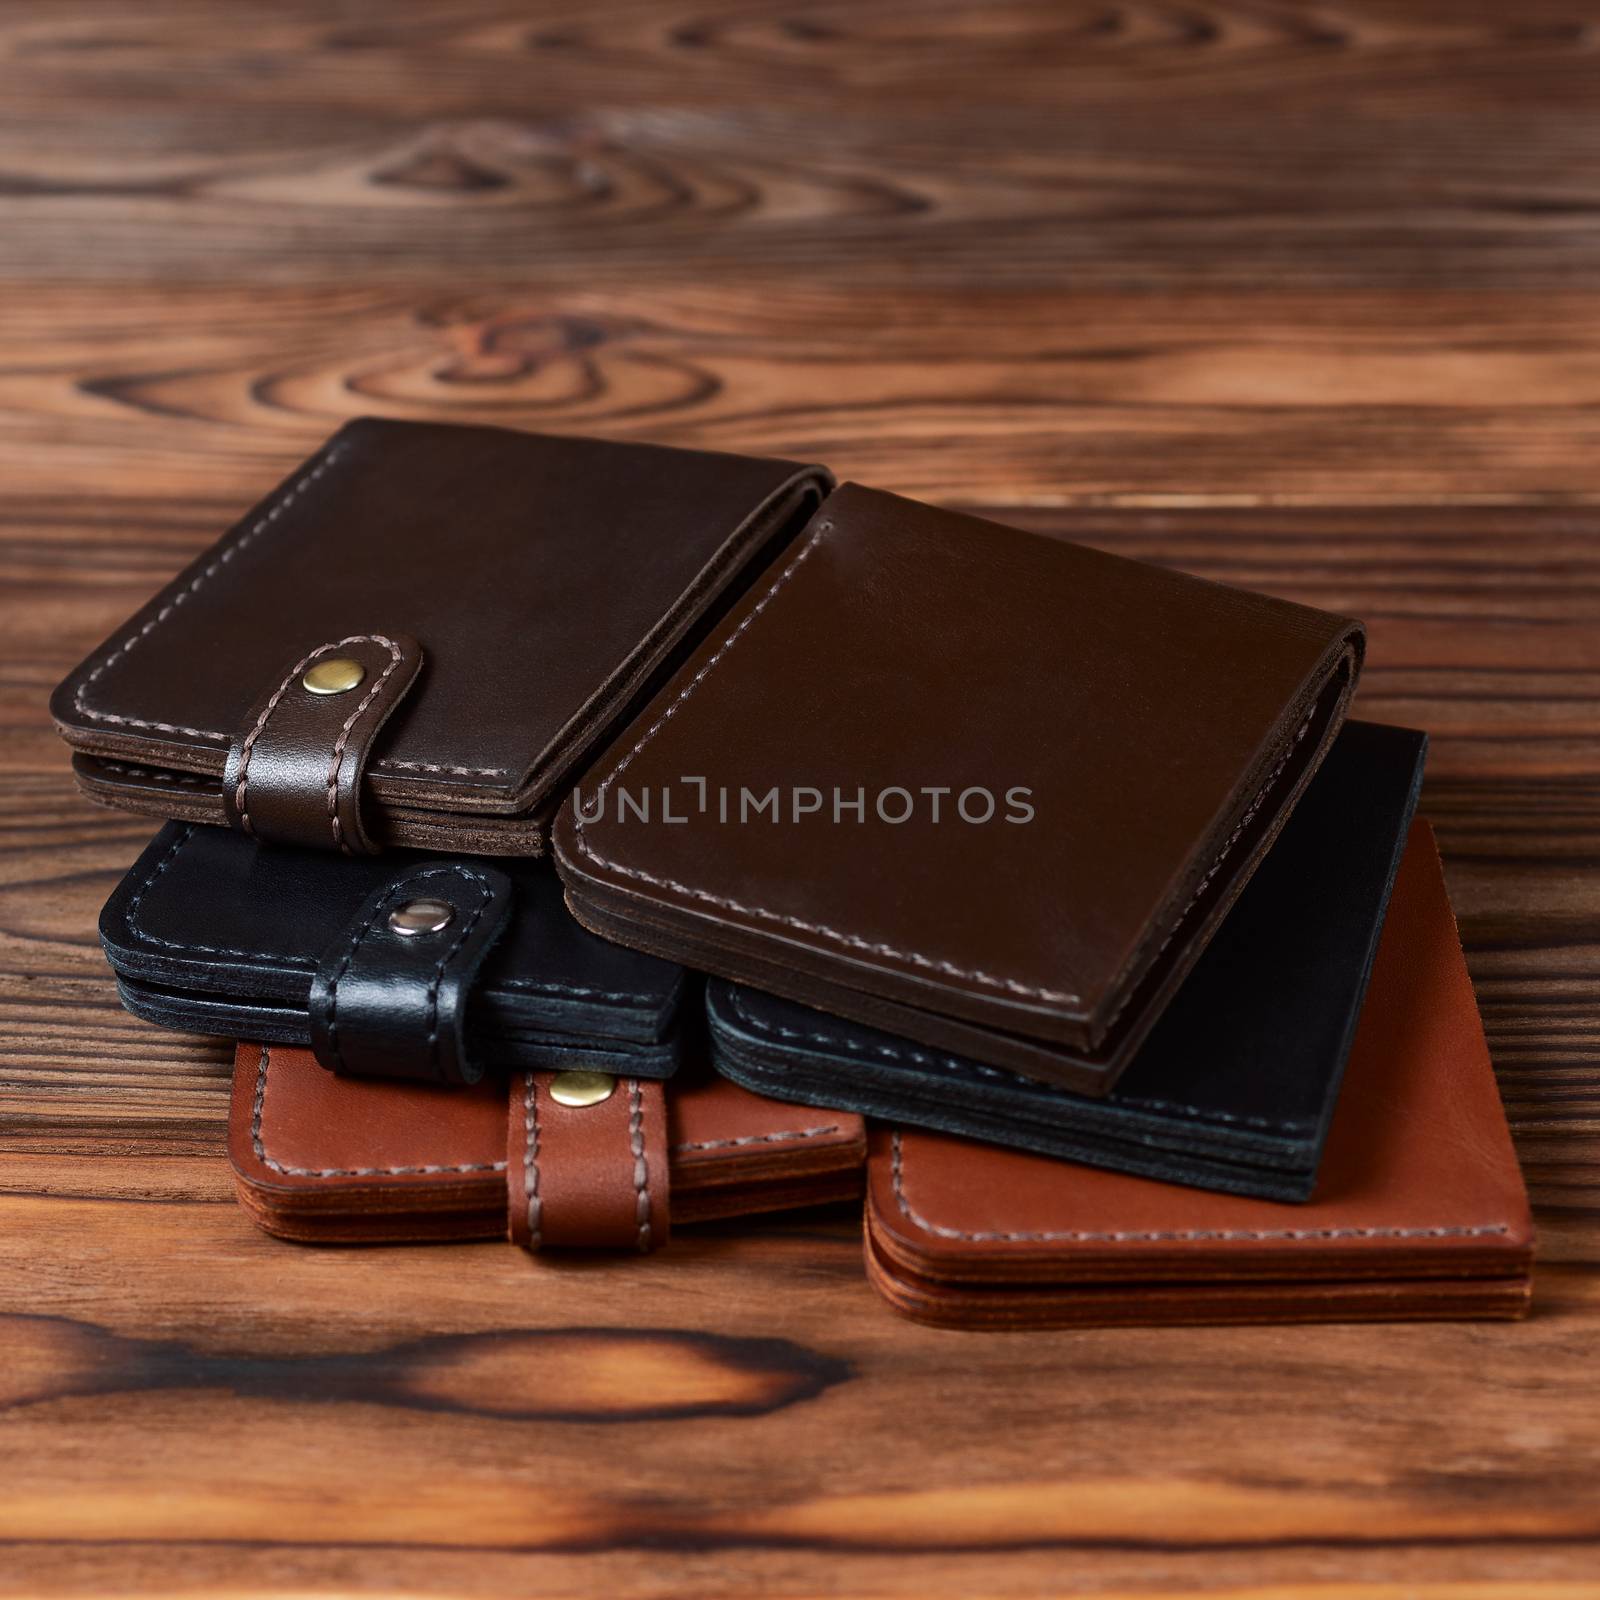 Six handmade leather wallets on wooden textured background. closeup. Wallet stock photo. by alexsdriver